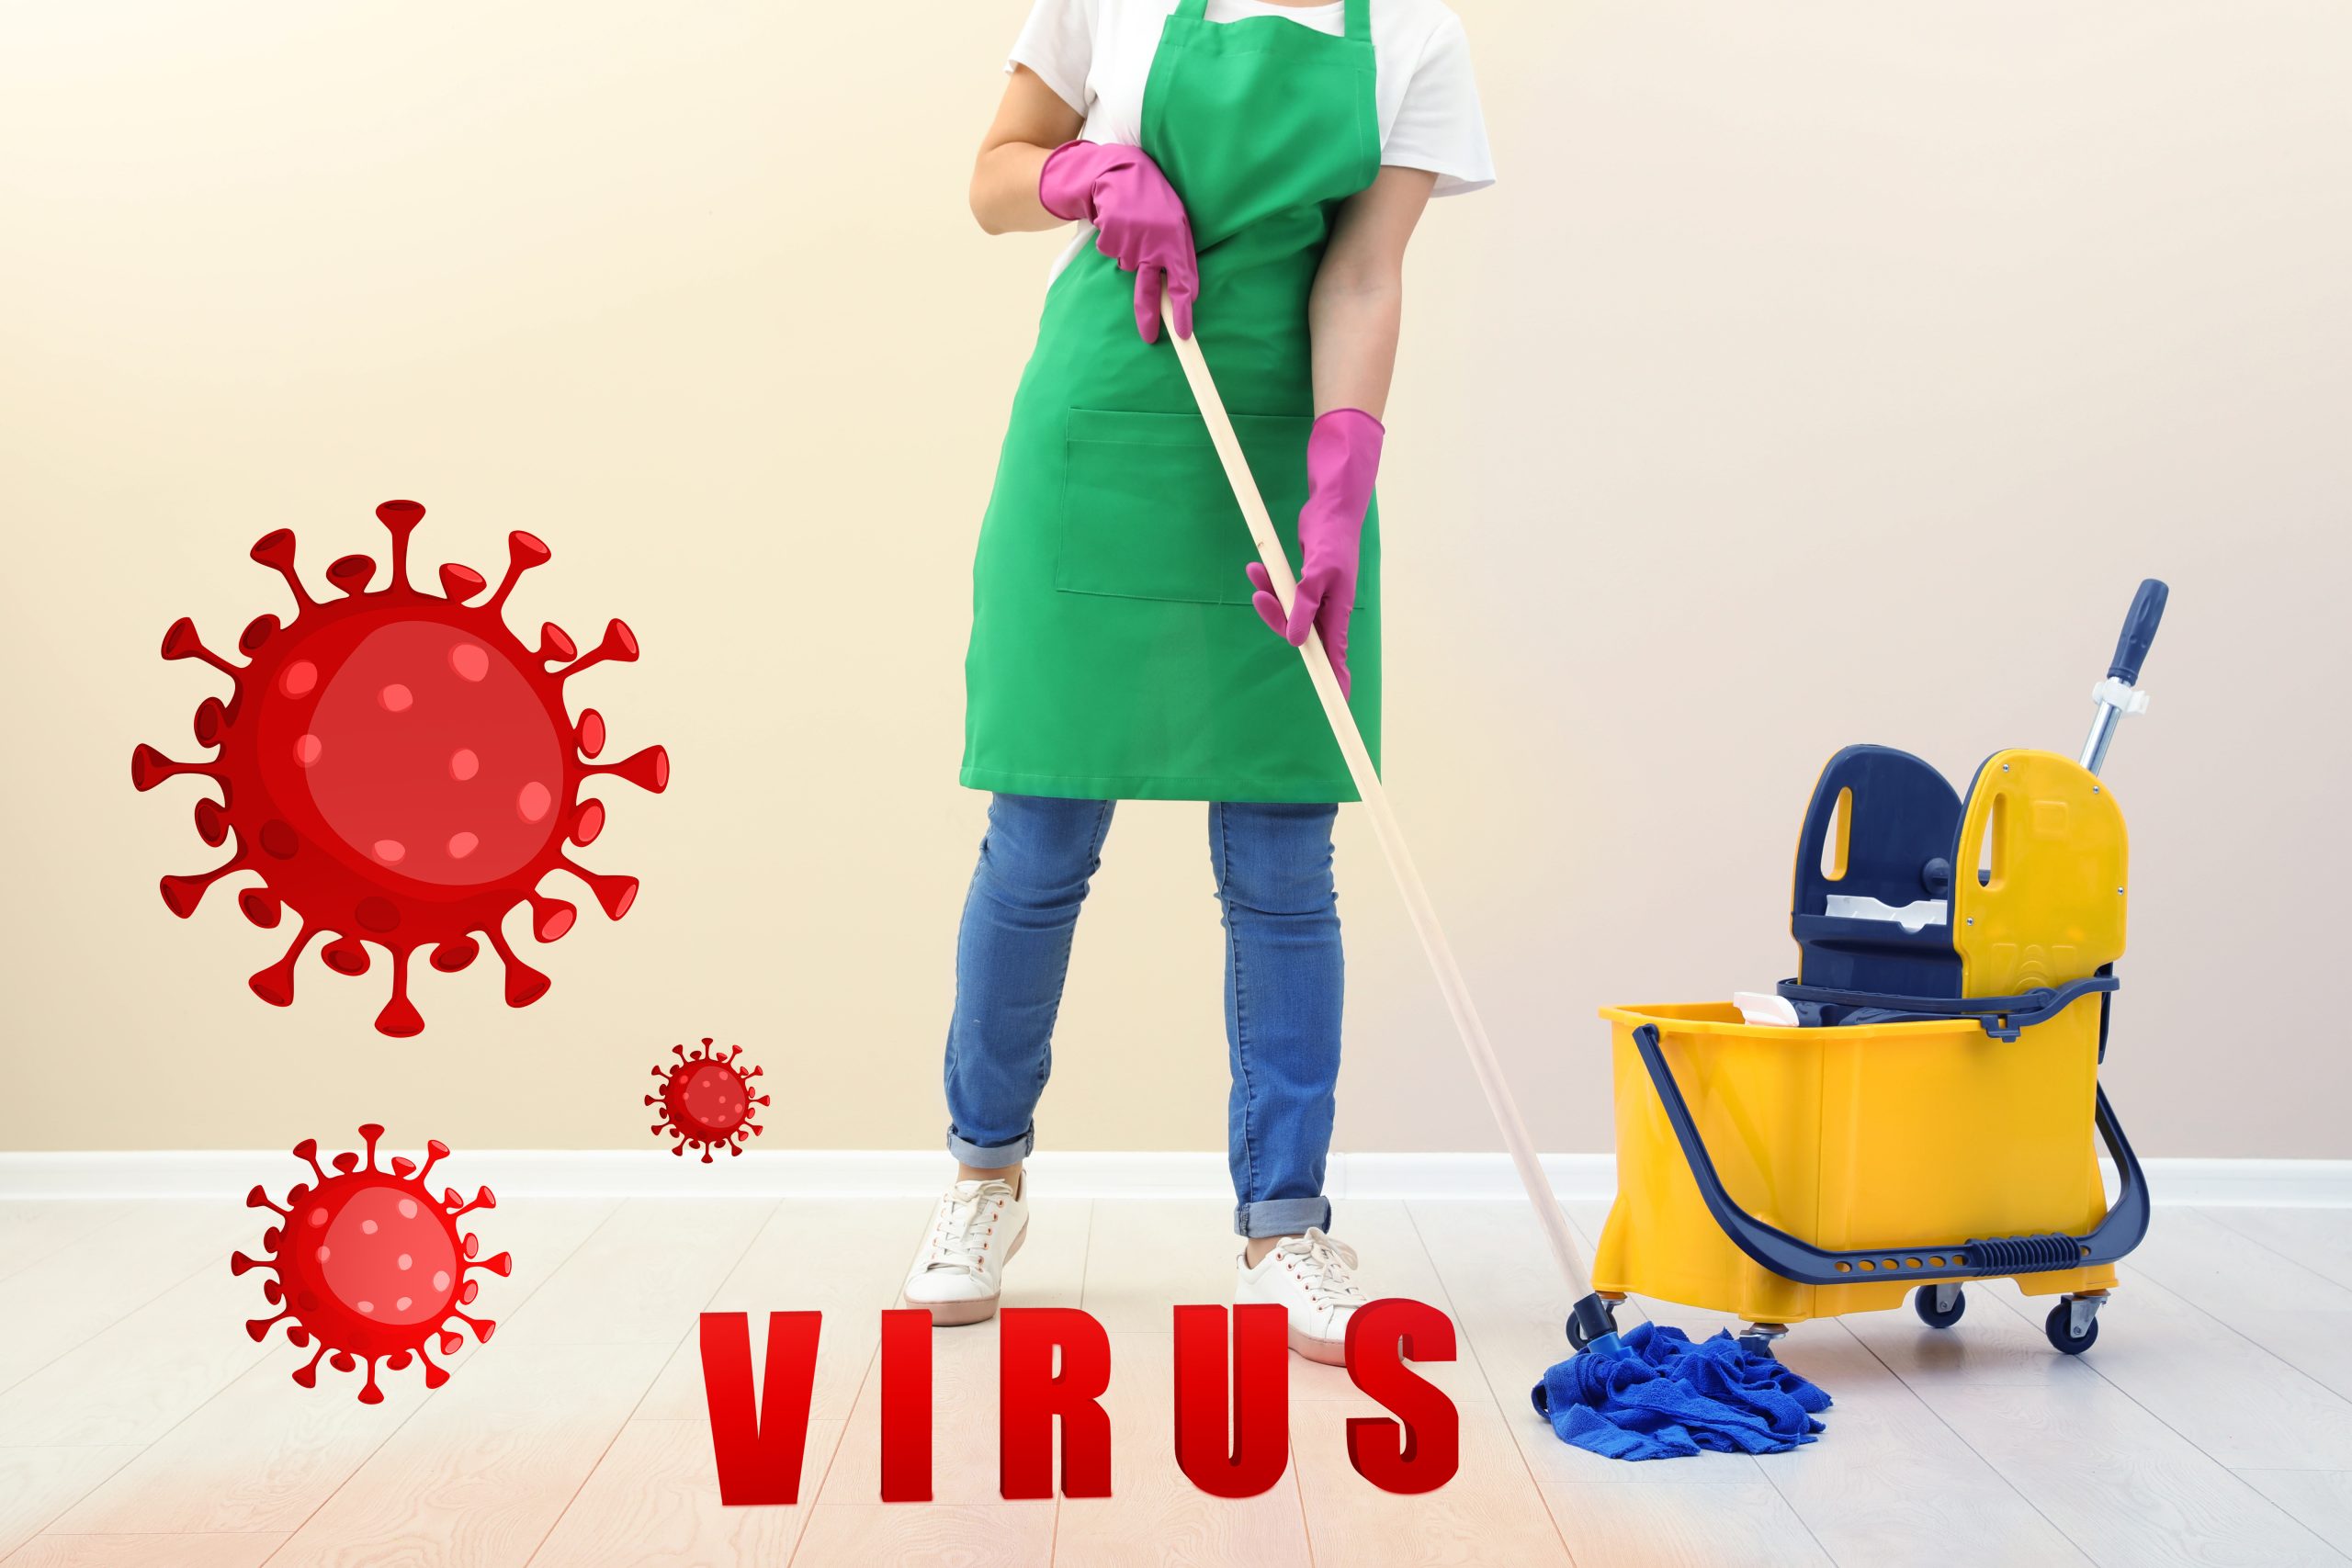 Cleaning-vs-viruses.-Woman-washing-floor-with-mop-and-disinfecting-solution